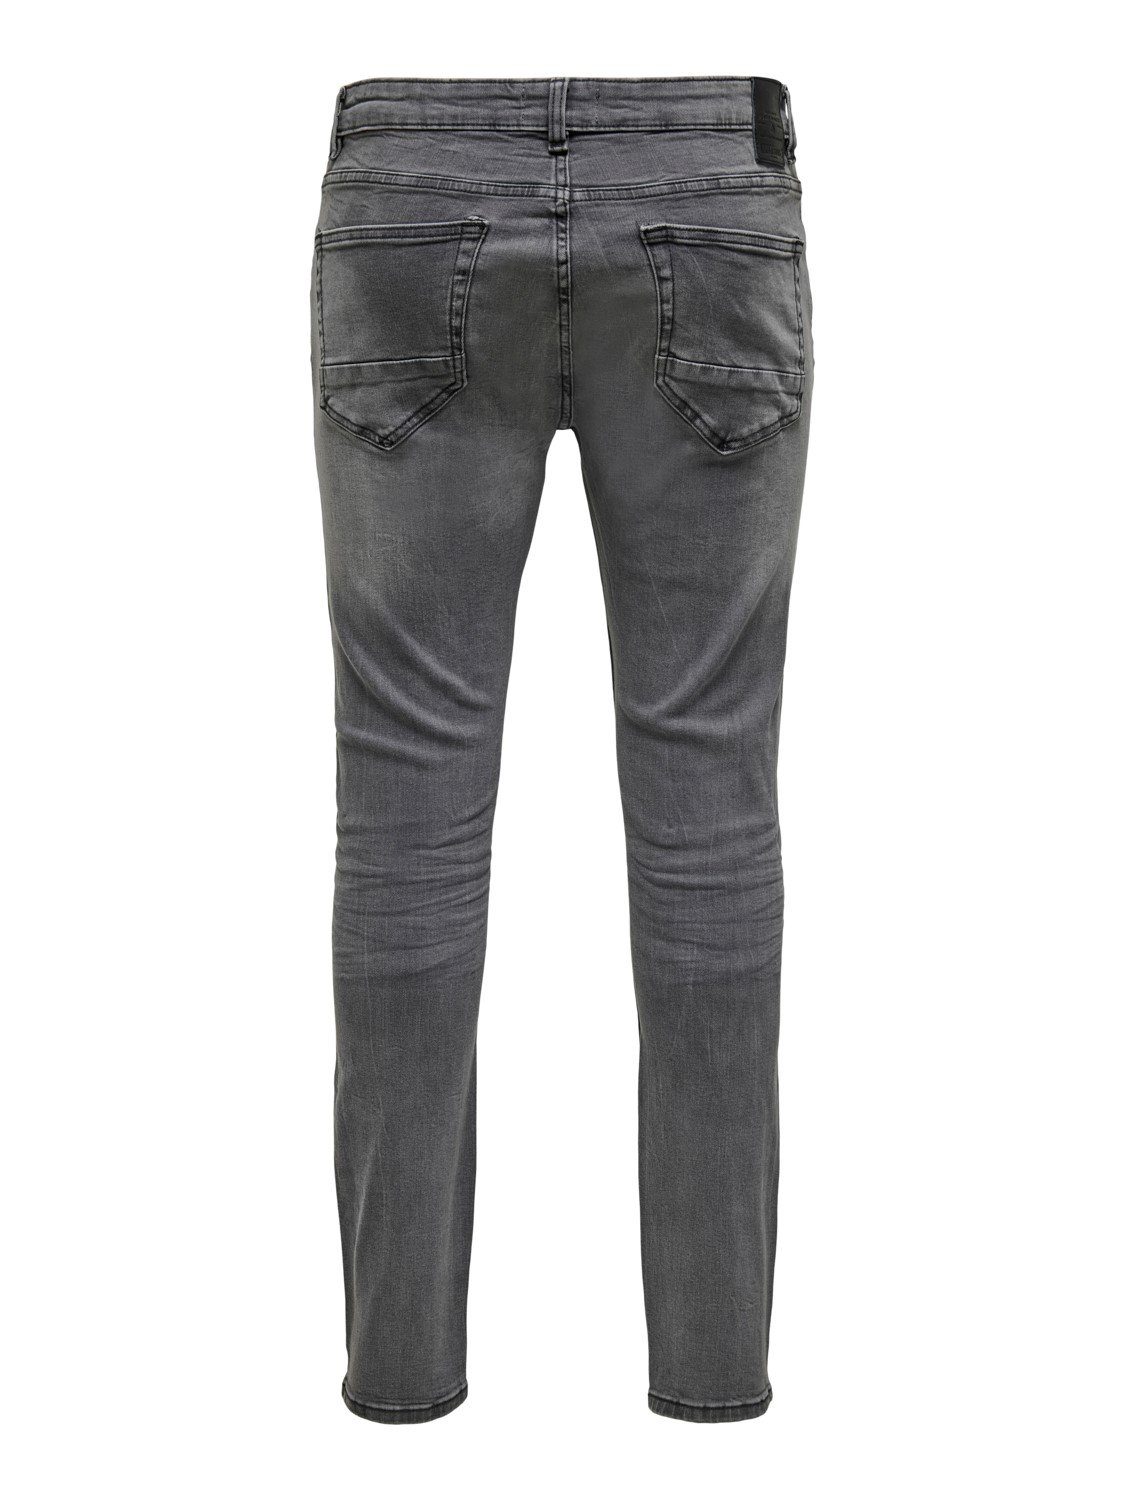 Denim Grau Washed Fit Pants Basic SONS Slim-fit-Jeans Stoned & ONSWARP in 3977 ONLY Hose Skinny Jeans (1-tlg)